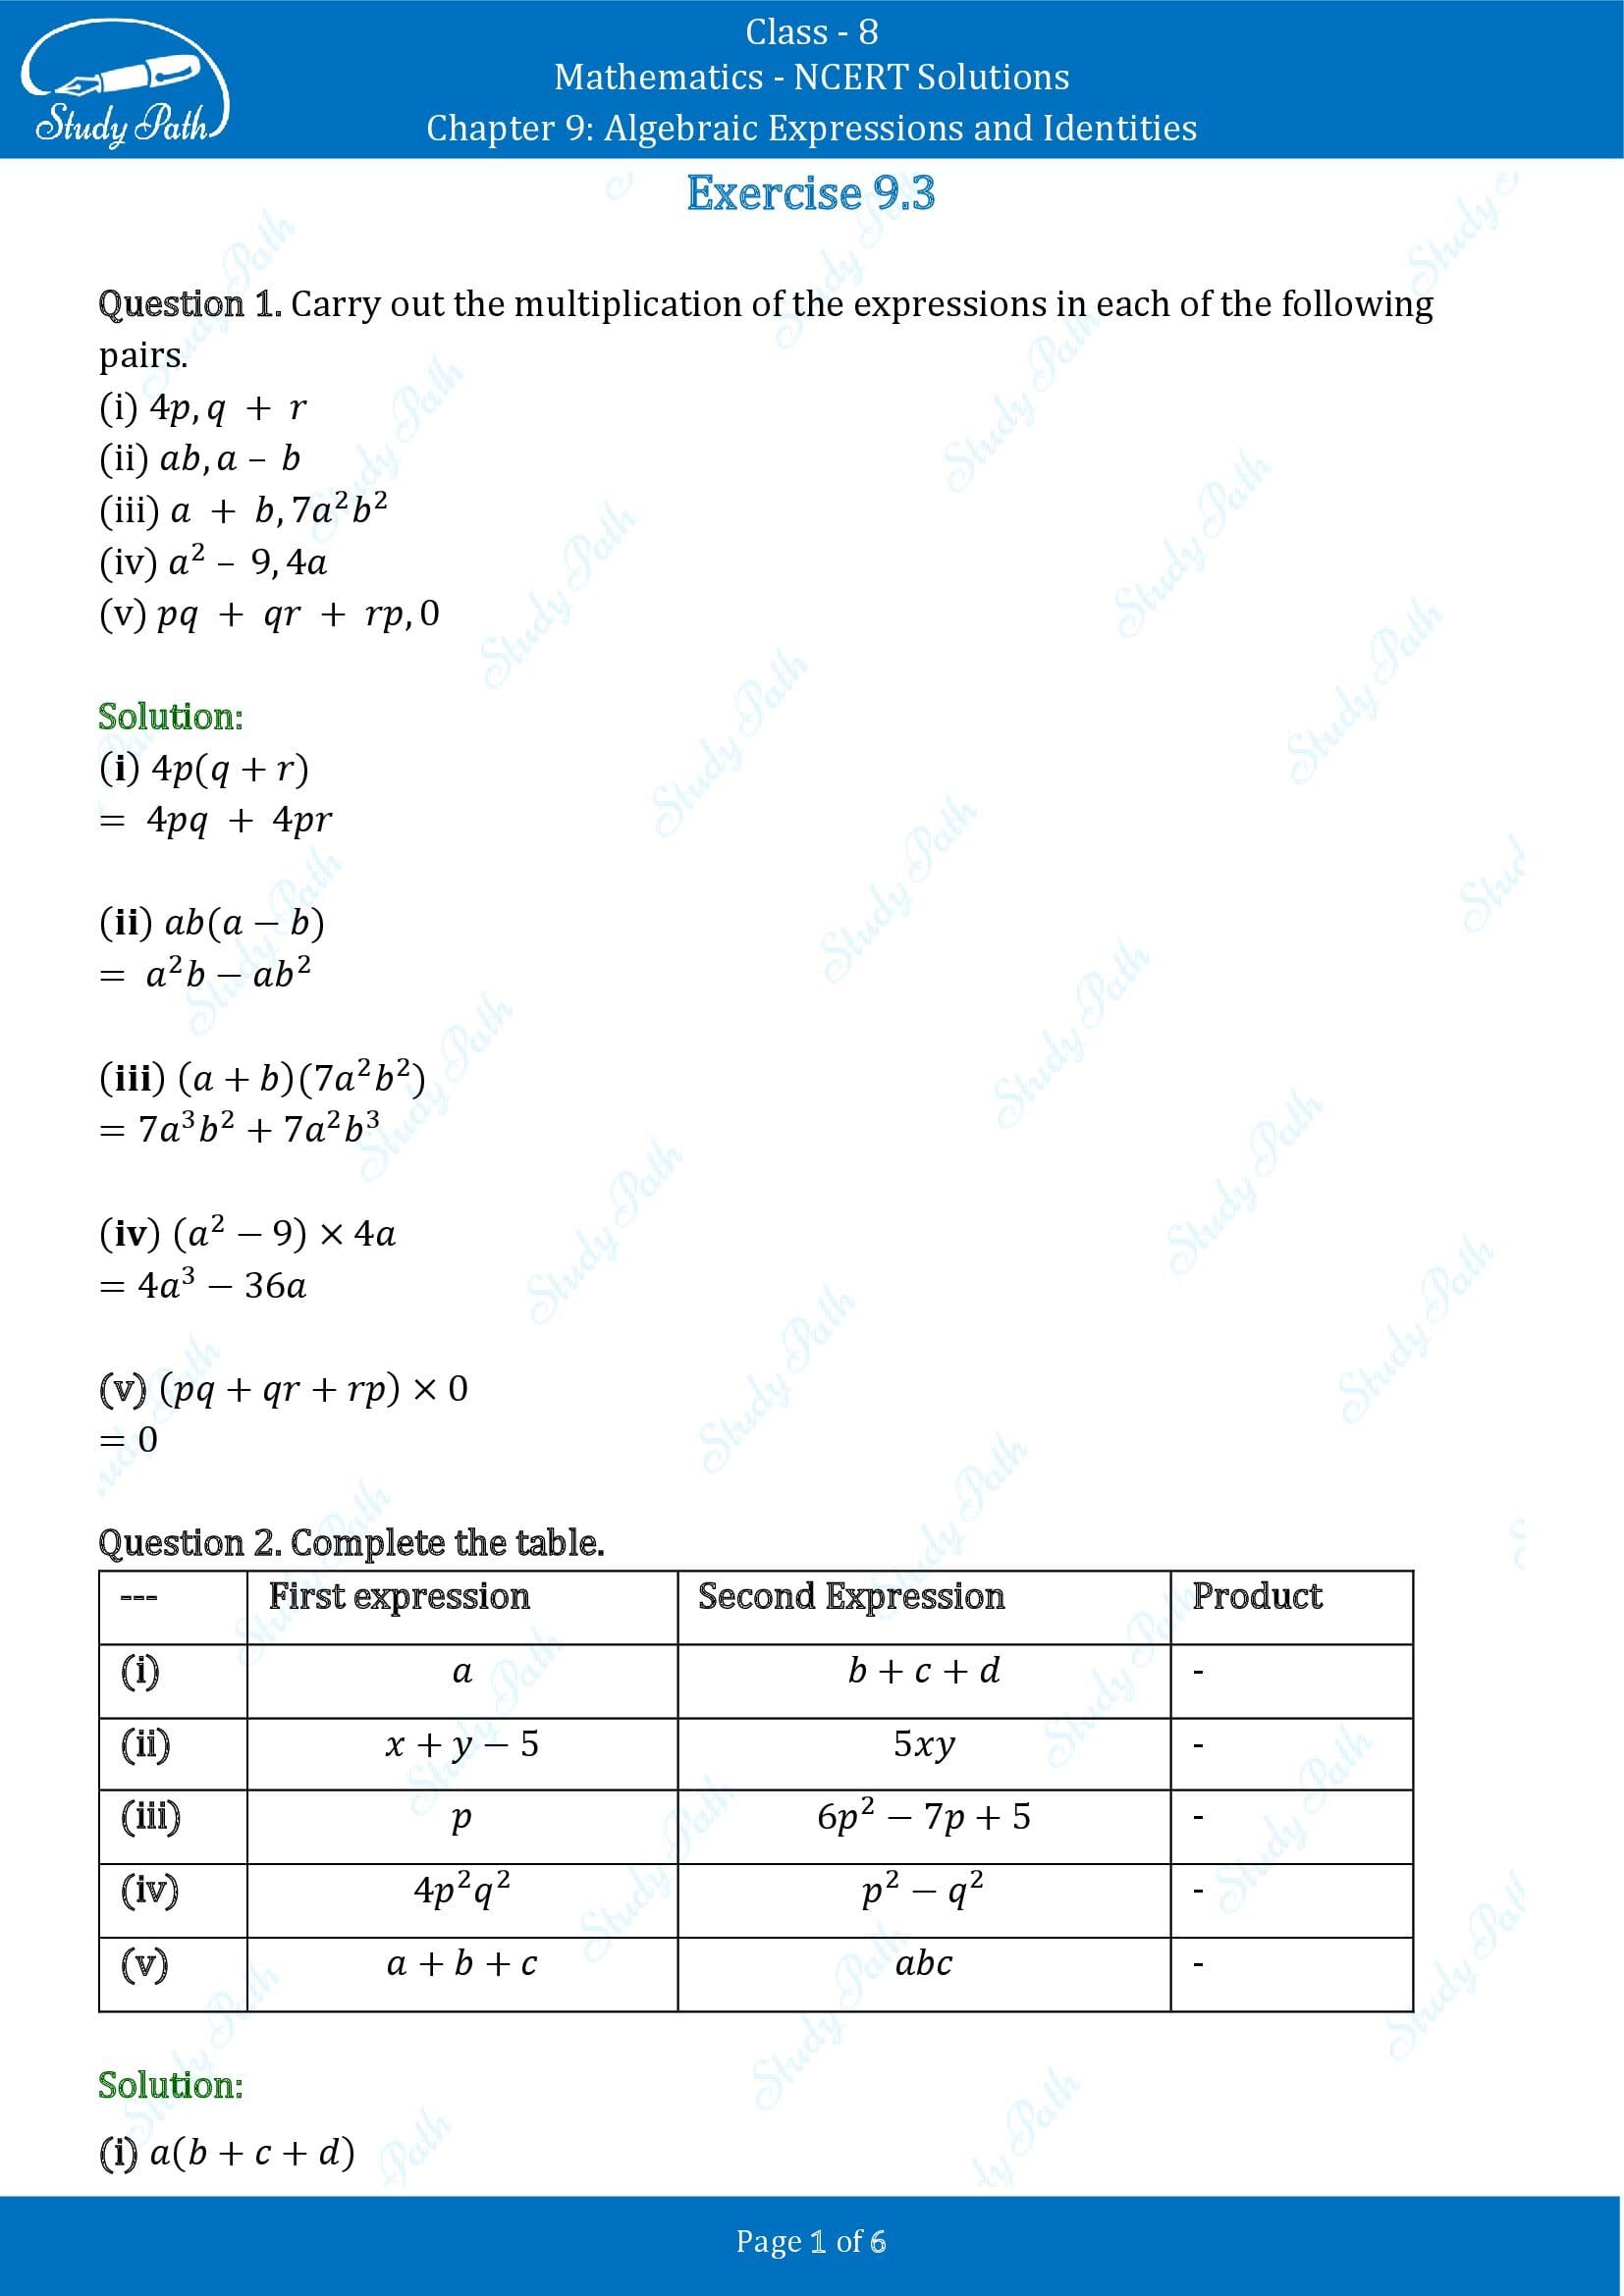 NCERT Solutions for Class 8 Maths Chapter 9 Algebraic Expressions and Identities Exercise 9.3 00001